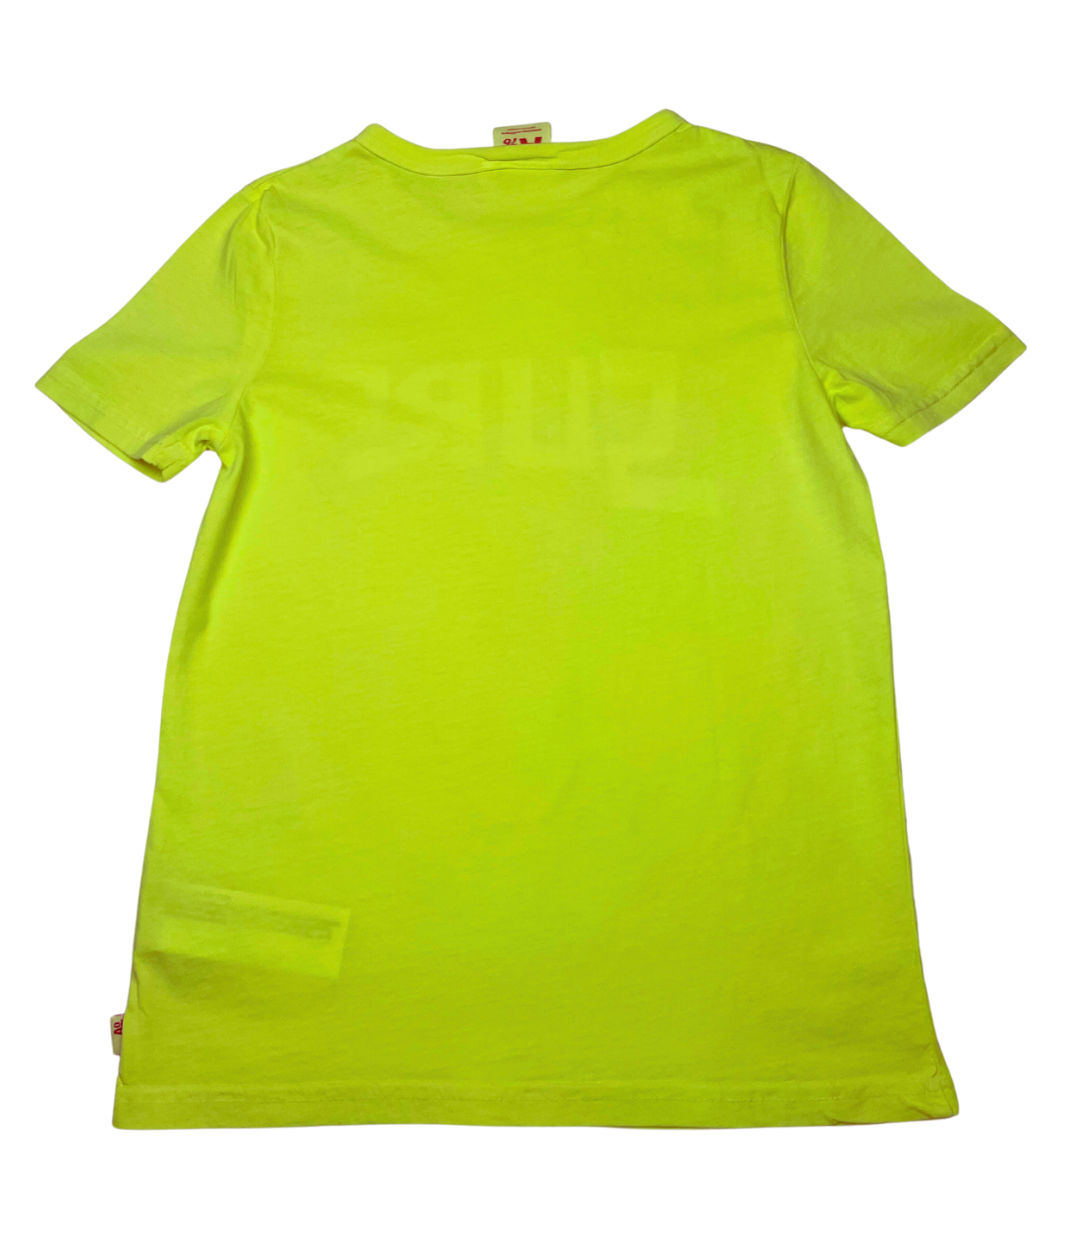 AMERICAN OUTFITTERS - T-shirt néon jaune "surf" - 8 ans